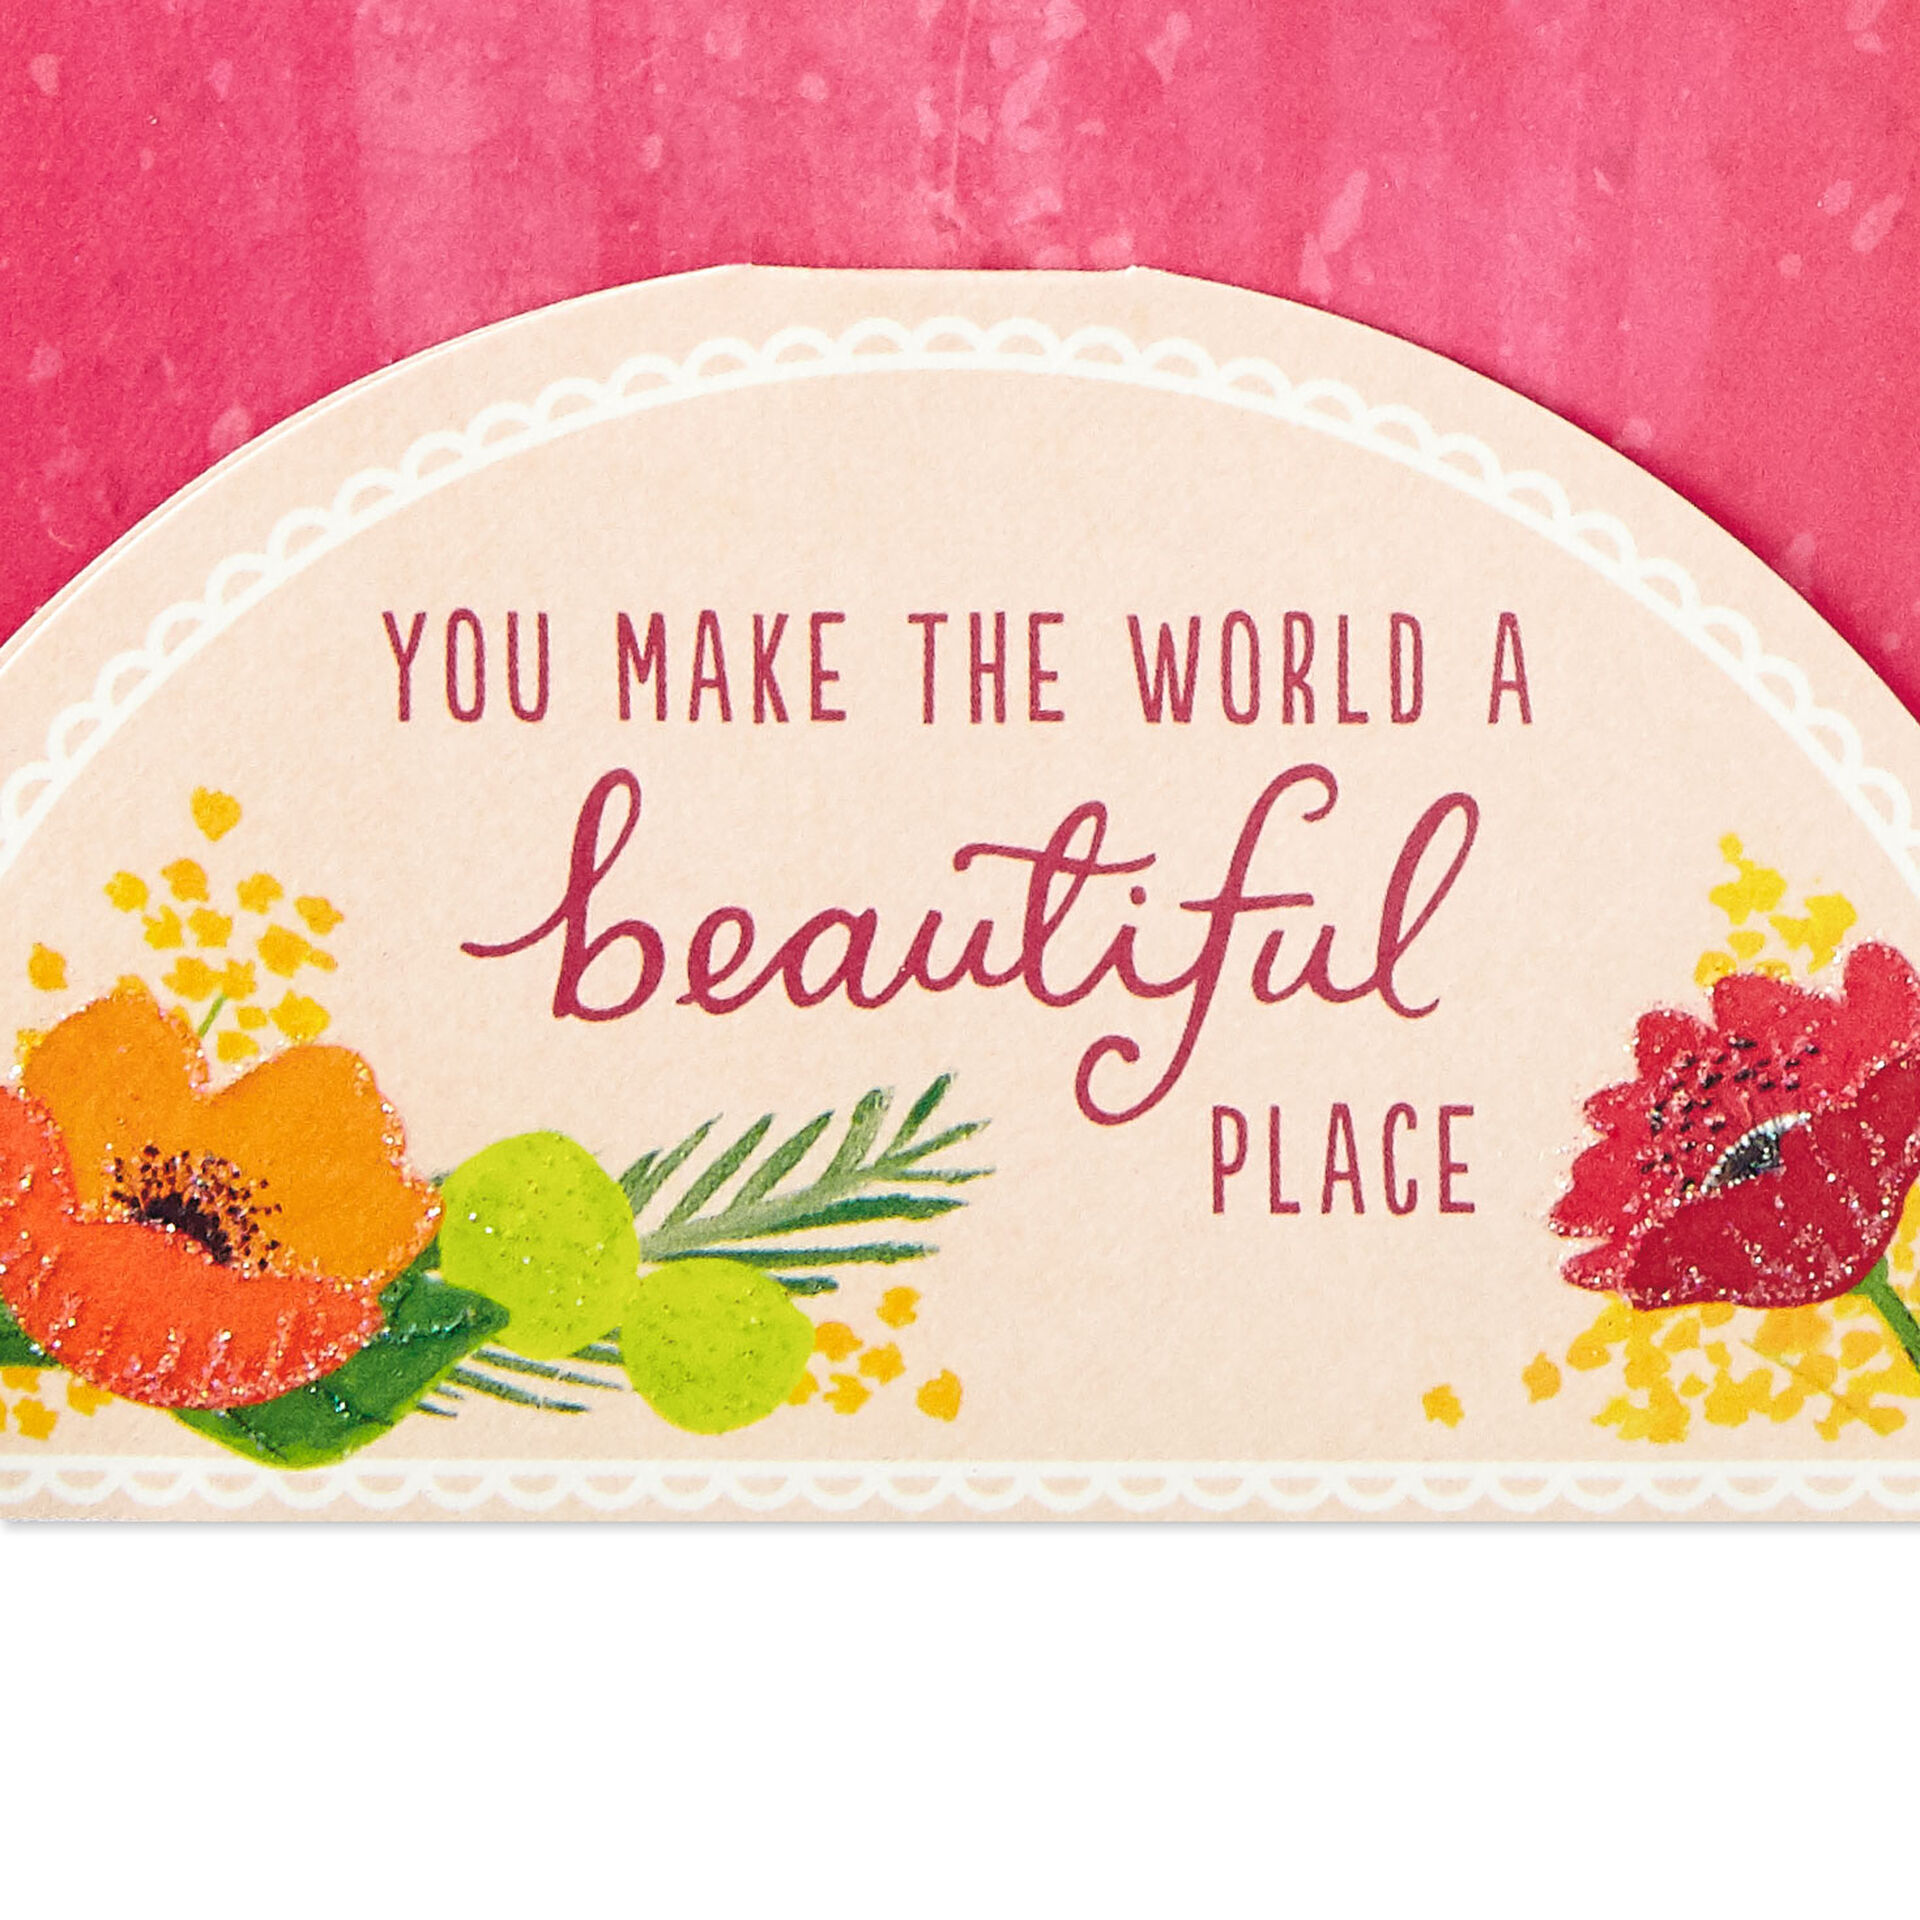 Flower-Bouquet-With-Butterfly-Mini-3D-PopUp-Thinking-of-You-Card_699WDR1122_03